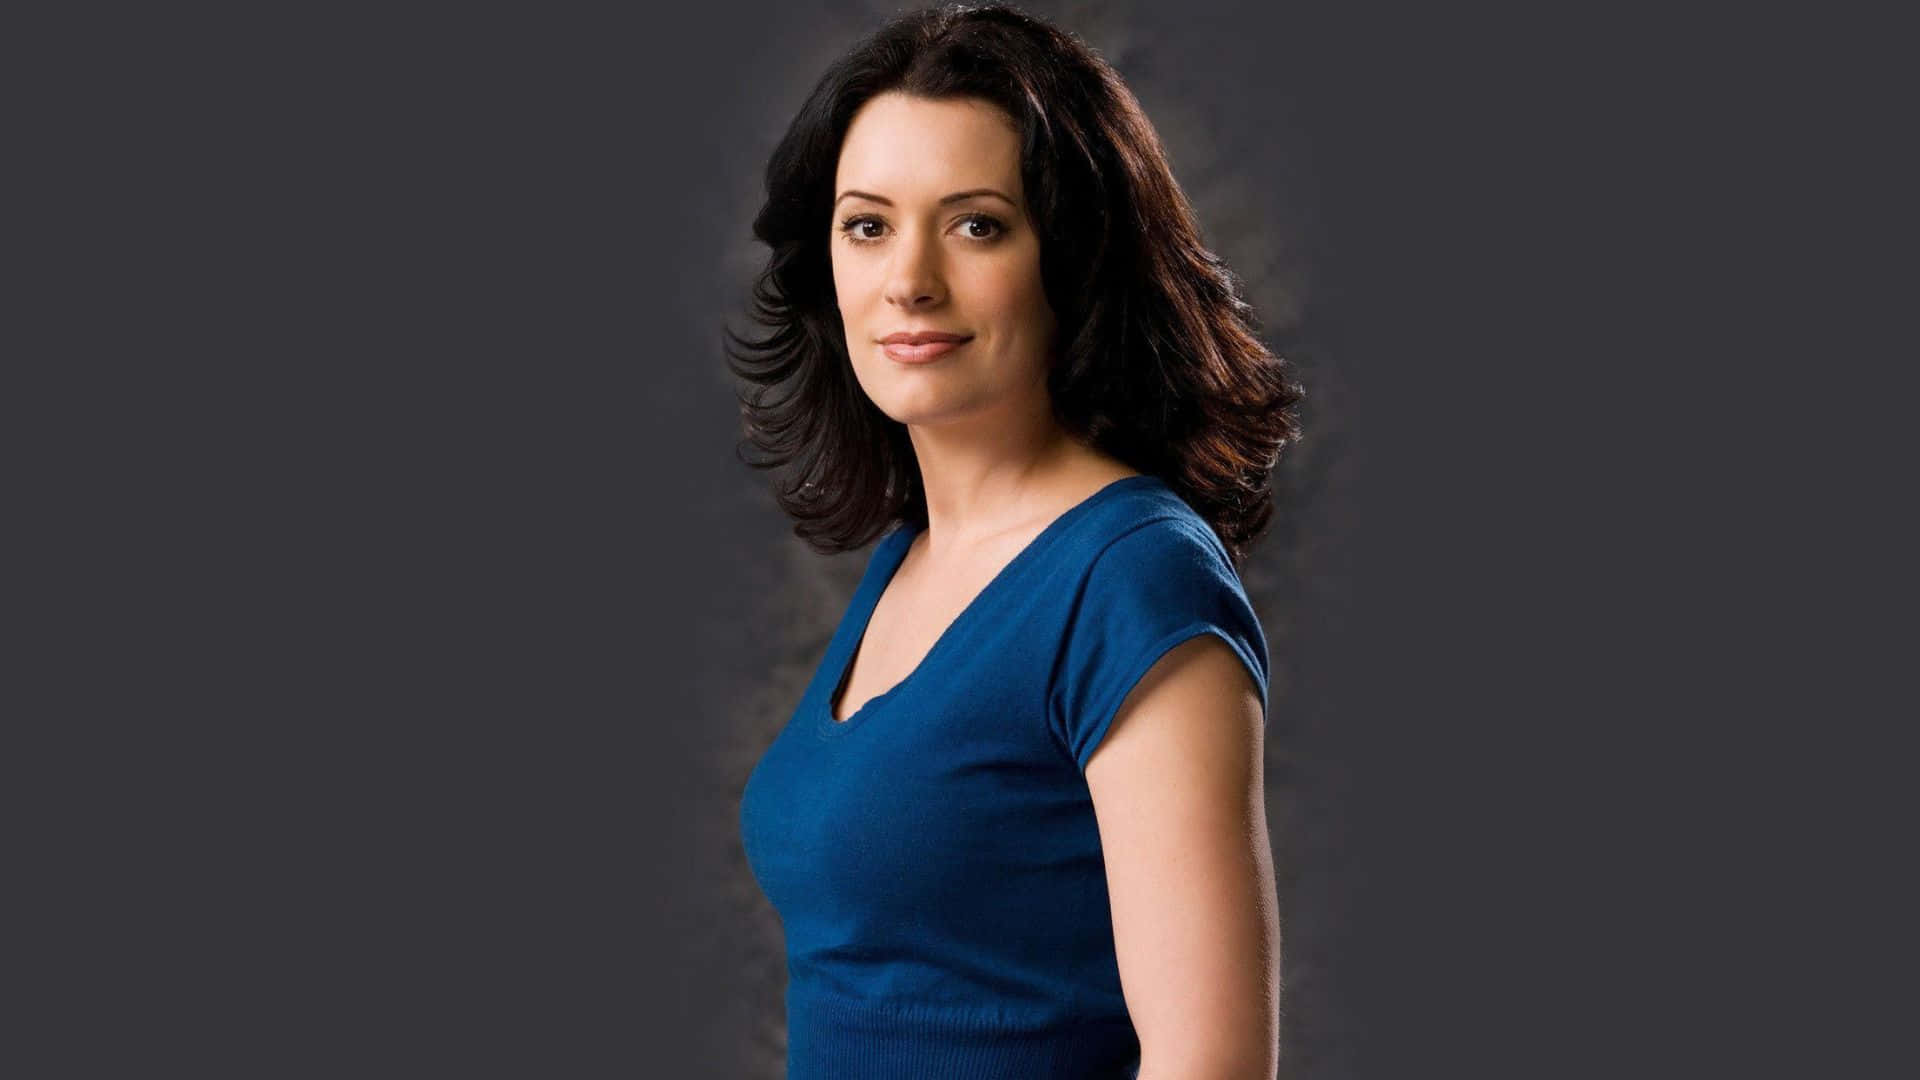 Paget Brewster Striking A Pose In A Stunning Photoshoot Background